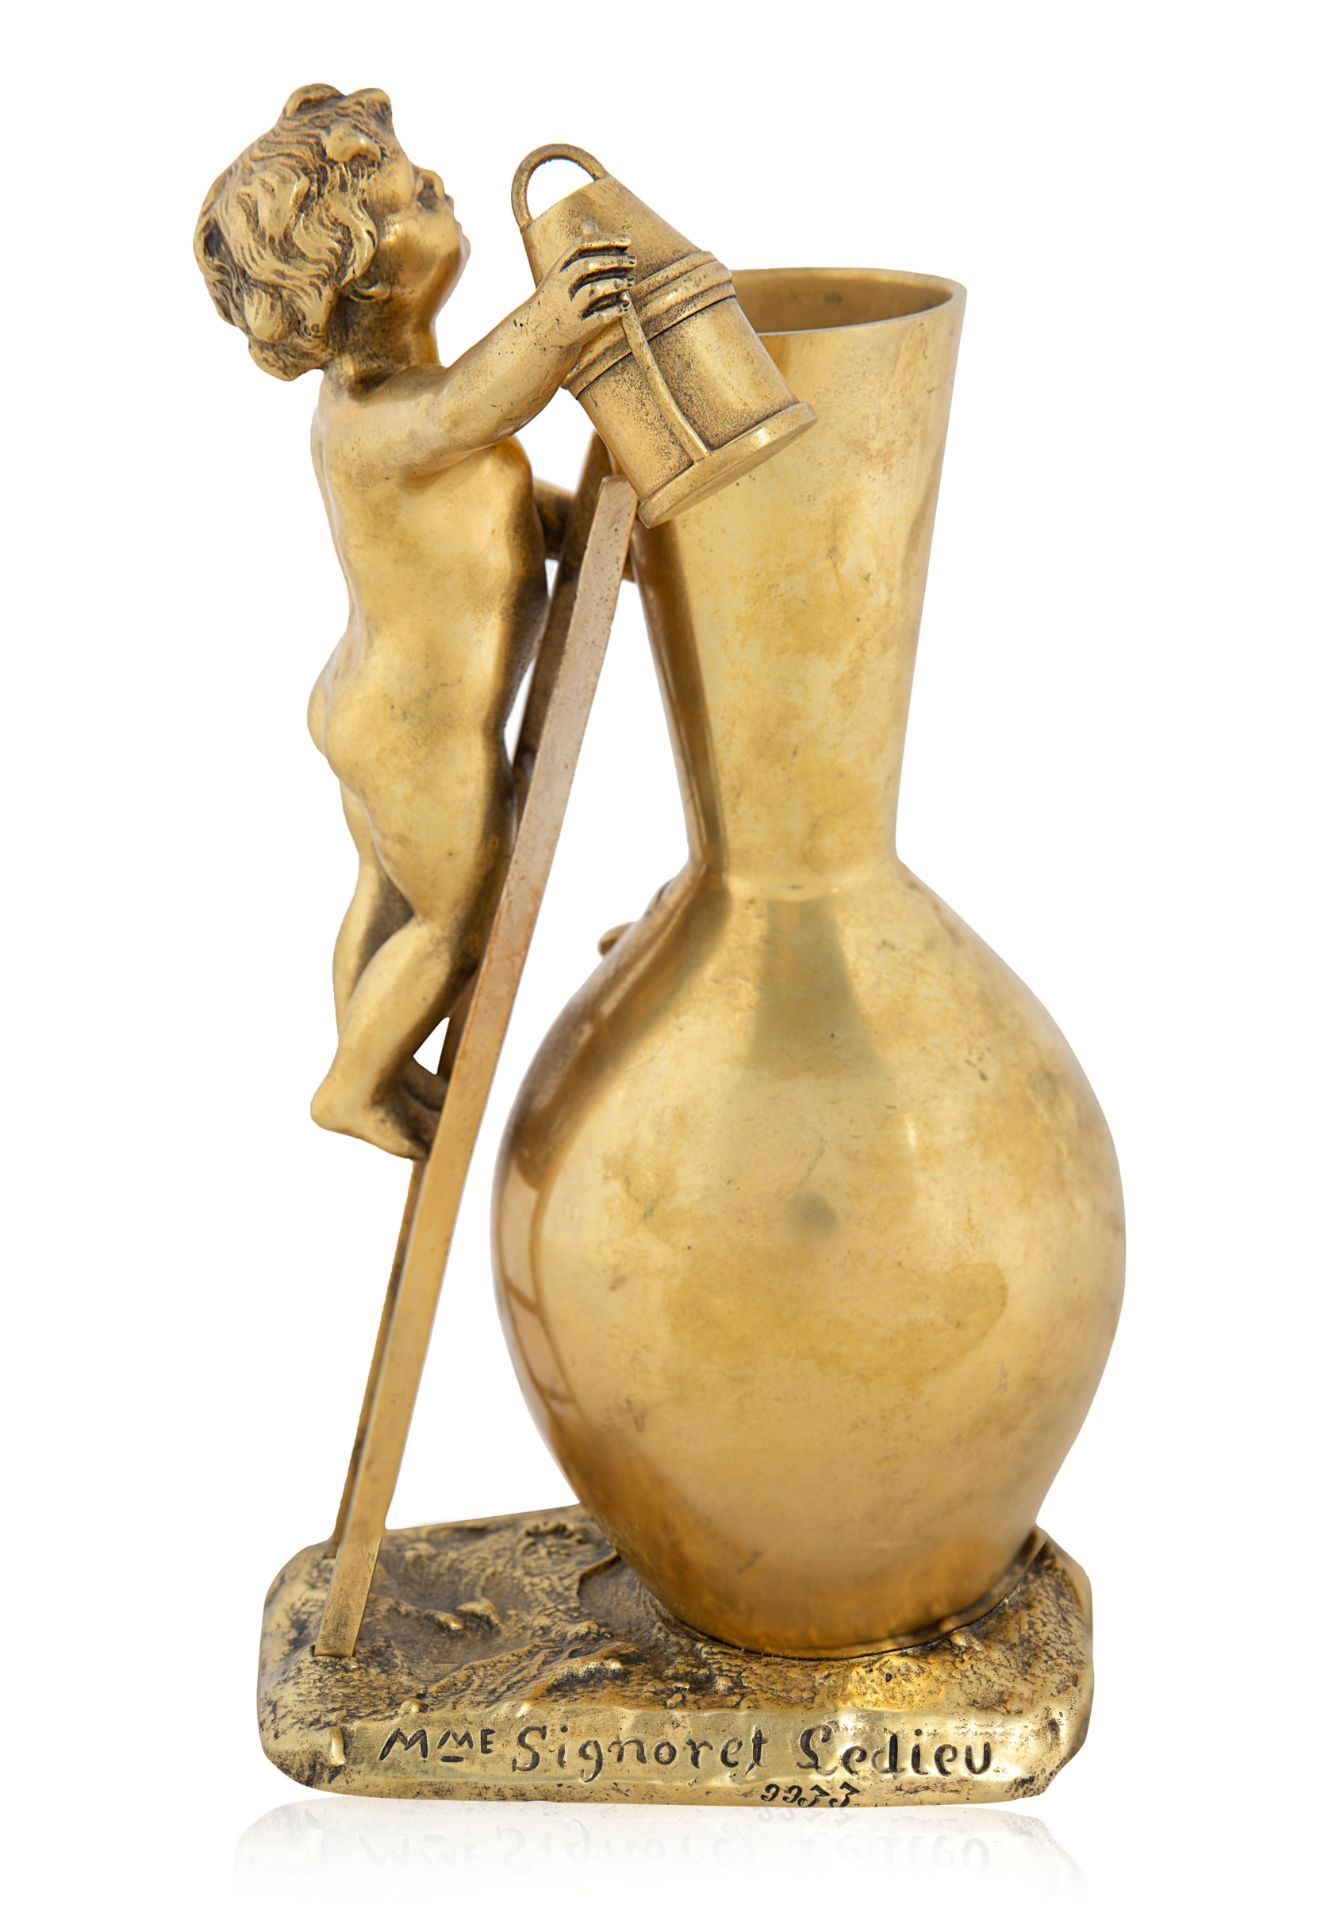 A FRENCH BRONZE ART NOUVEAU VASE BY LUCIE SIGNORET-LEDIEU (FRENCH 1858-1904) - Image 2 of 2